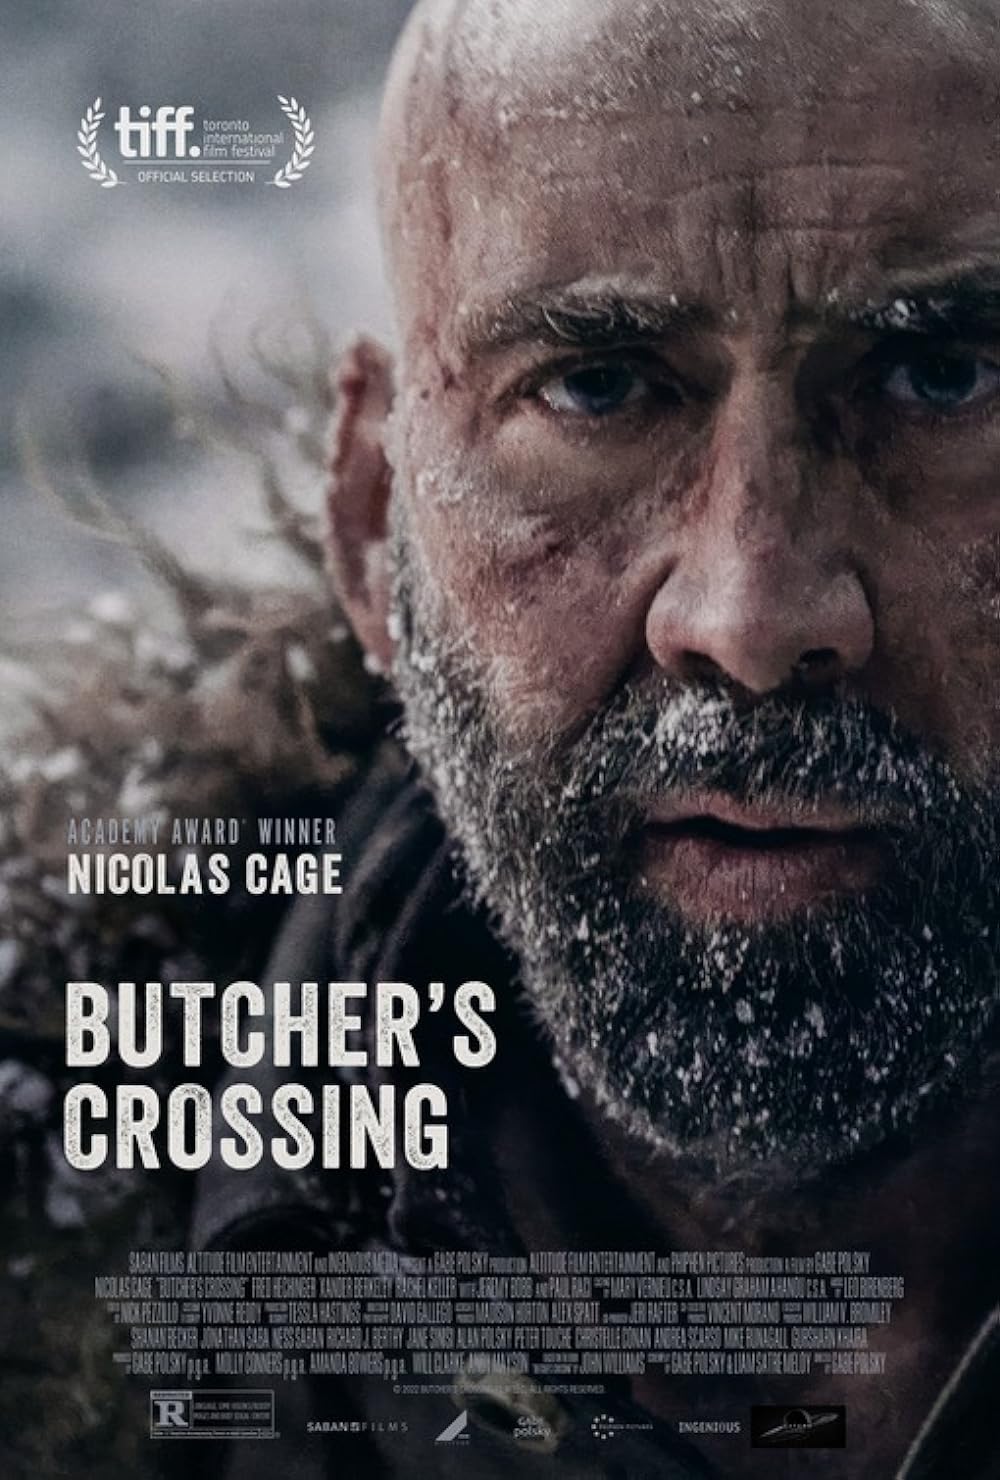 Movie Poster: Butcher’s Crossing